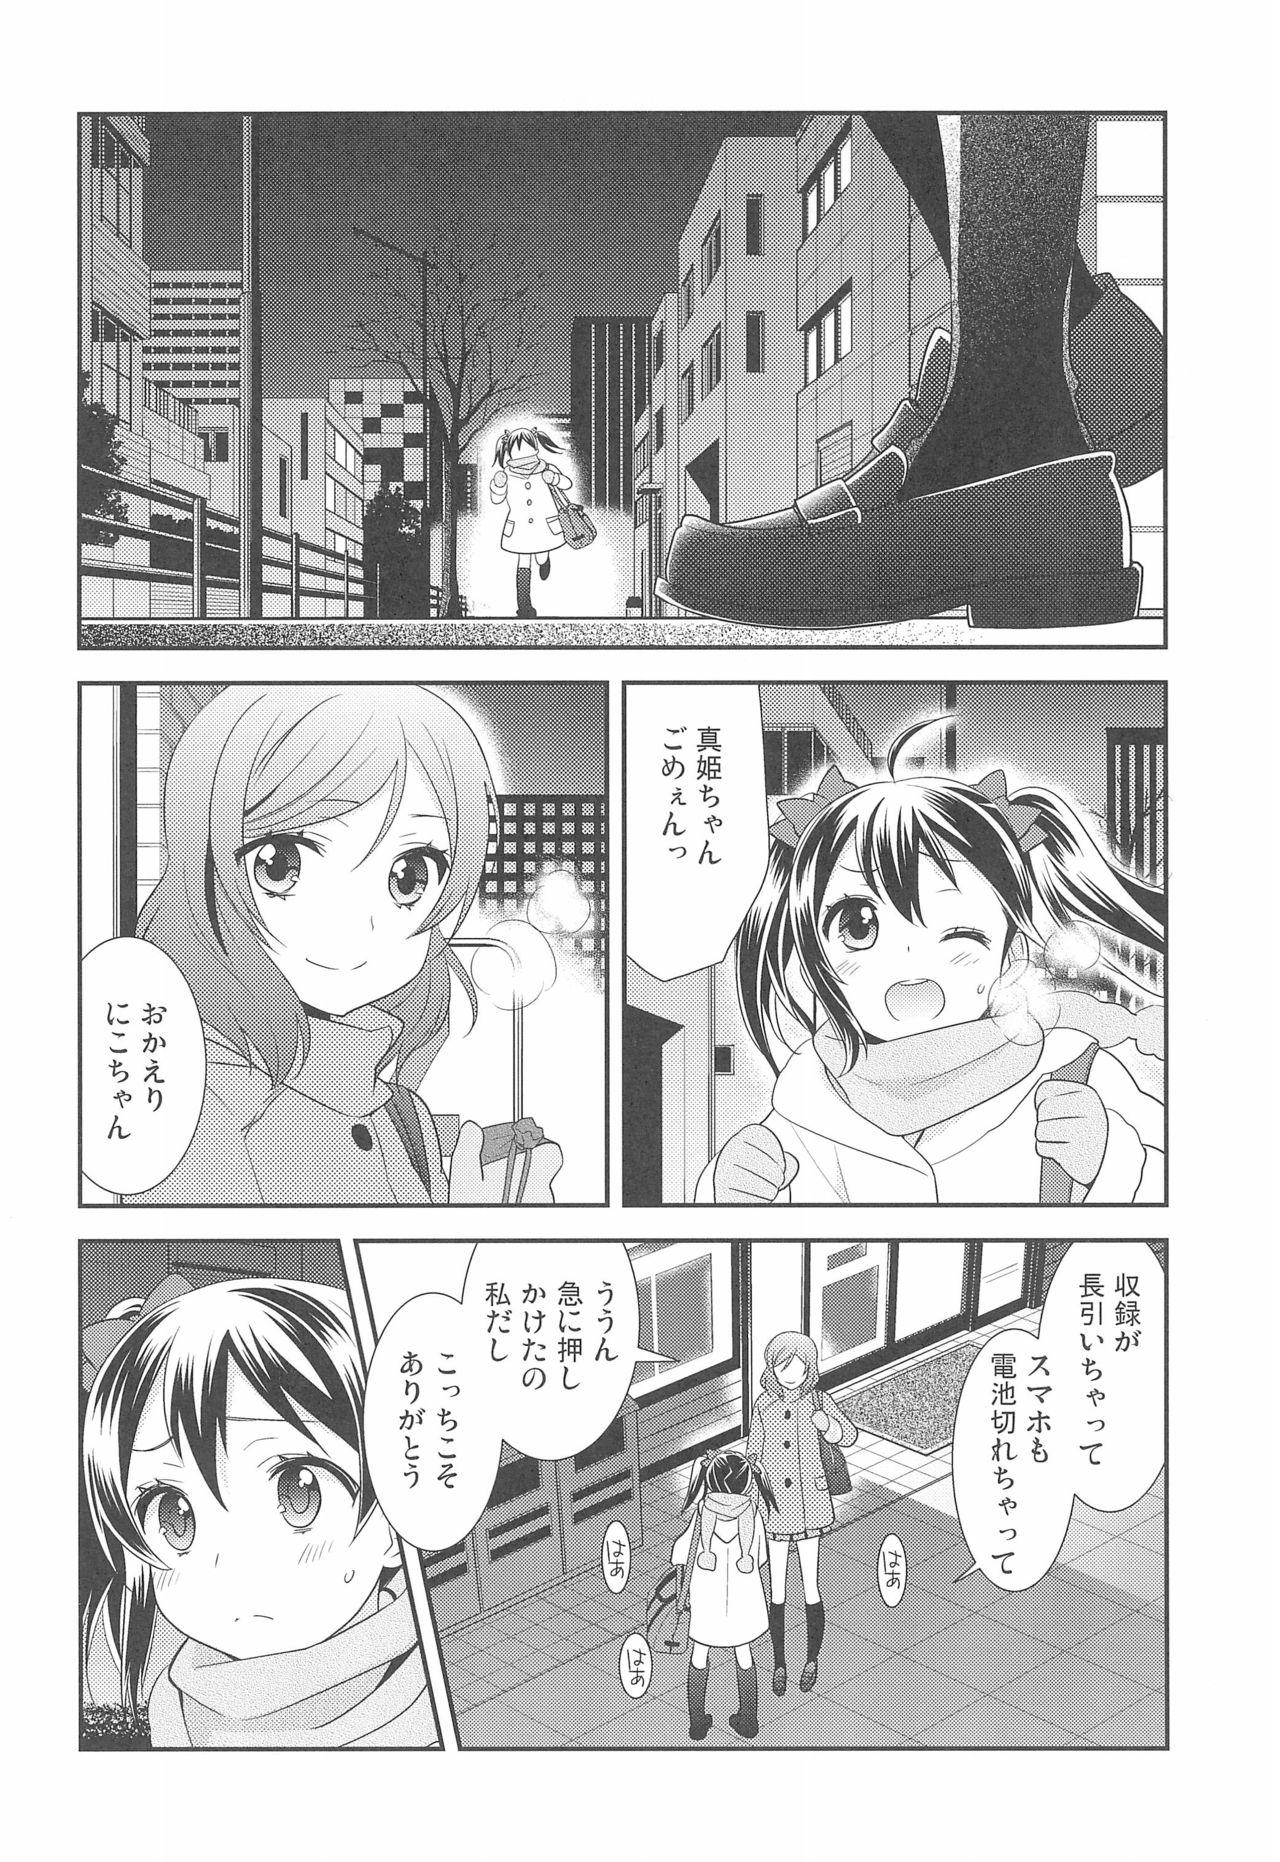 Step Fantasy BABY I LOVE YOU - Love live Weird - Page 4